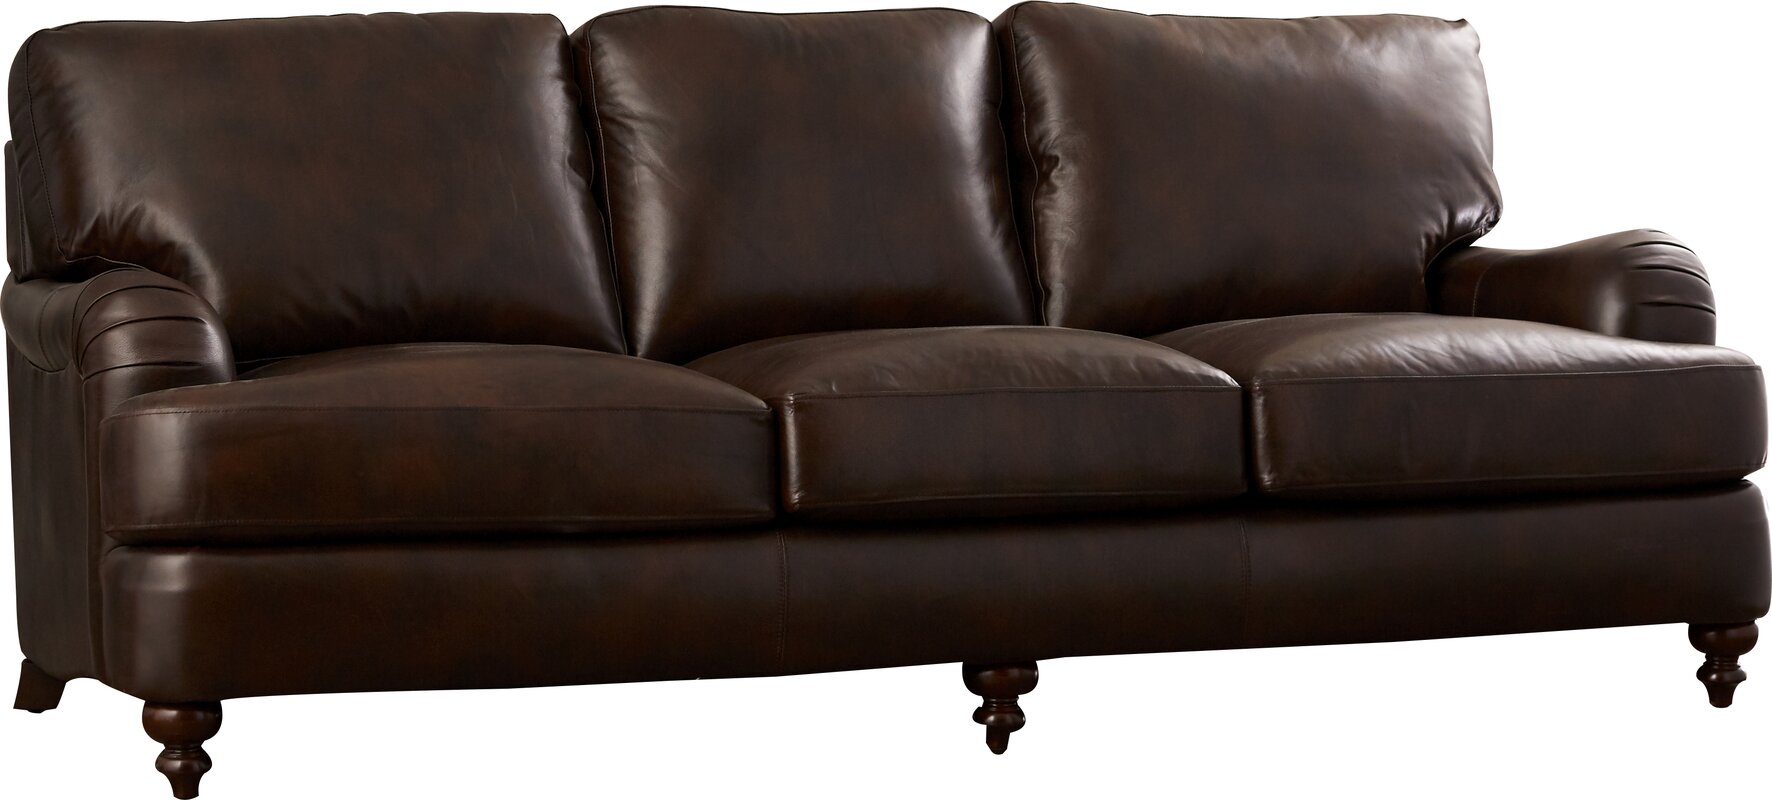 darby home tux leather sofa